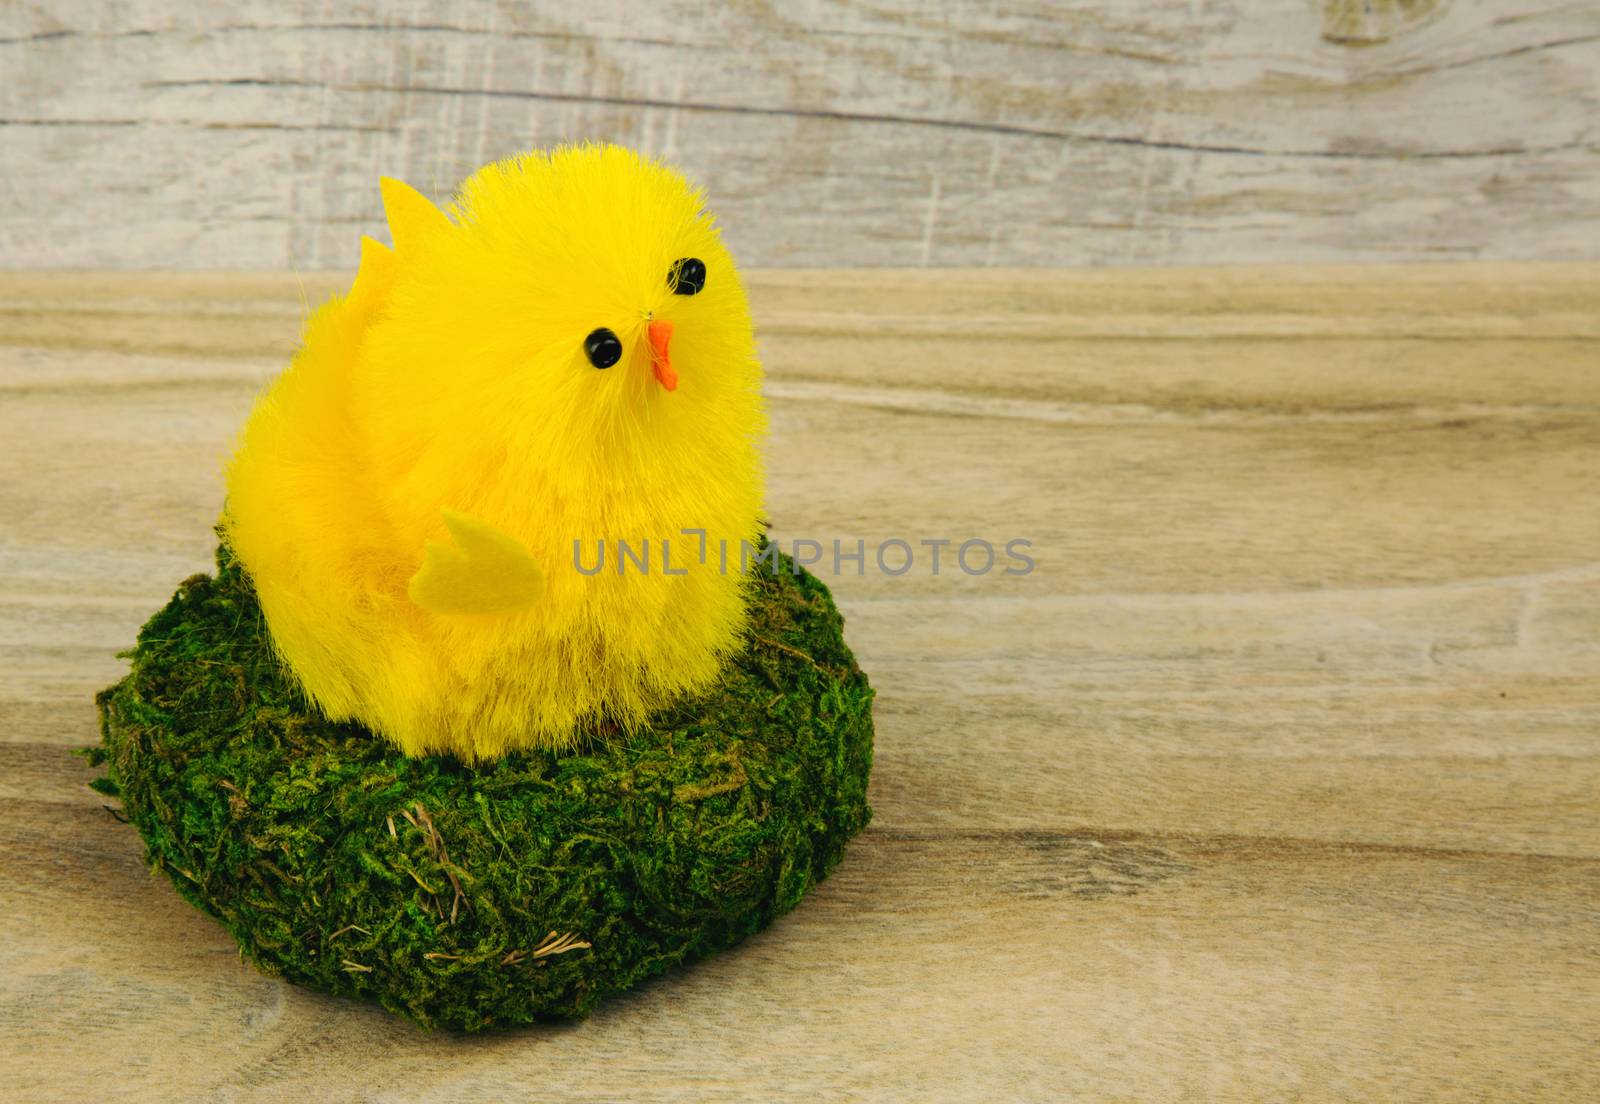 Easter figurines, yellow chicken in a nest with green moss on the background of the old wooden tabletop. Horizontal view.